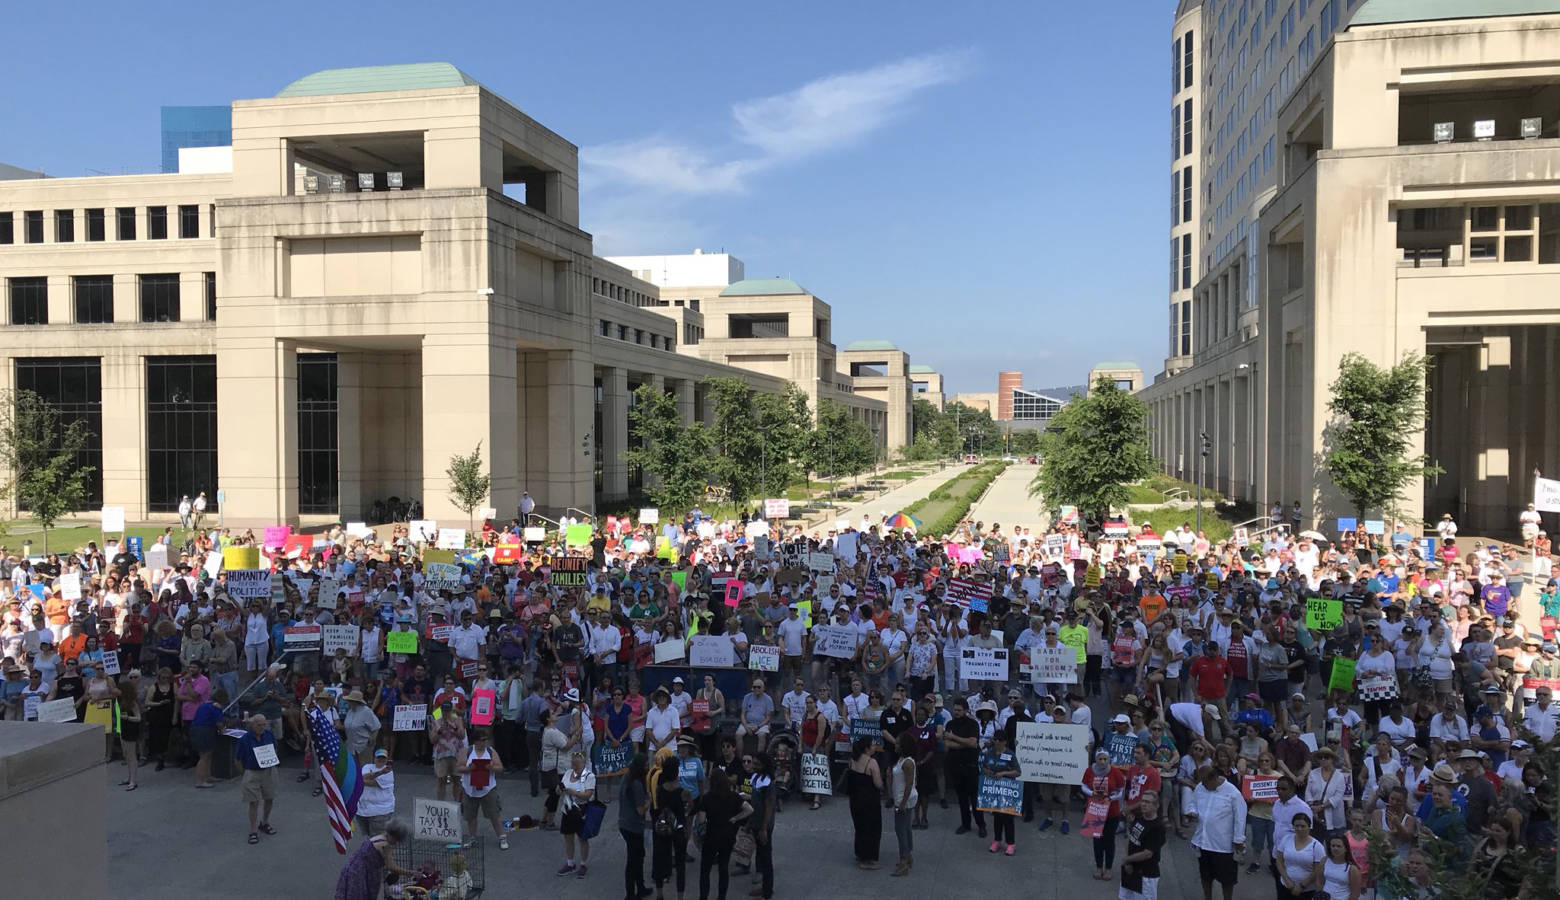 Hundreds gathered outside the Indiana Statehouse to protest the Trump administration's immigration policies. (Brandon Smith/IPB News)